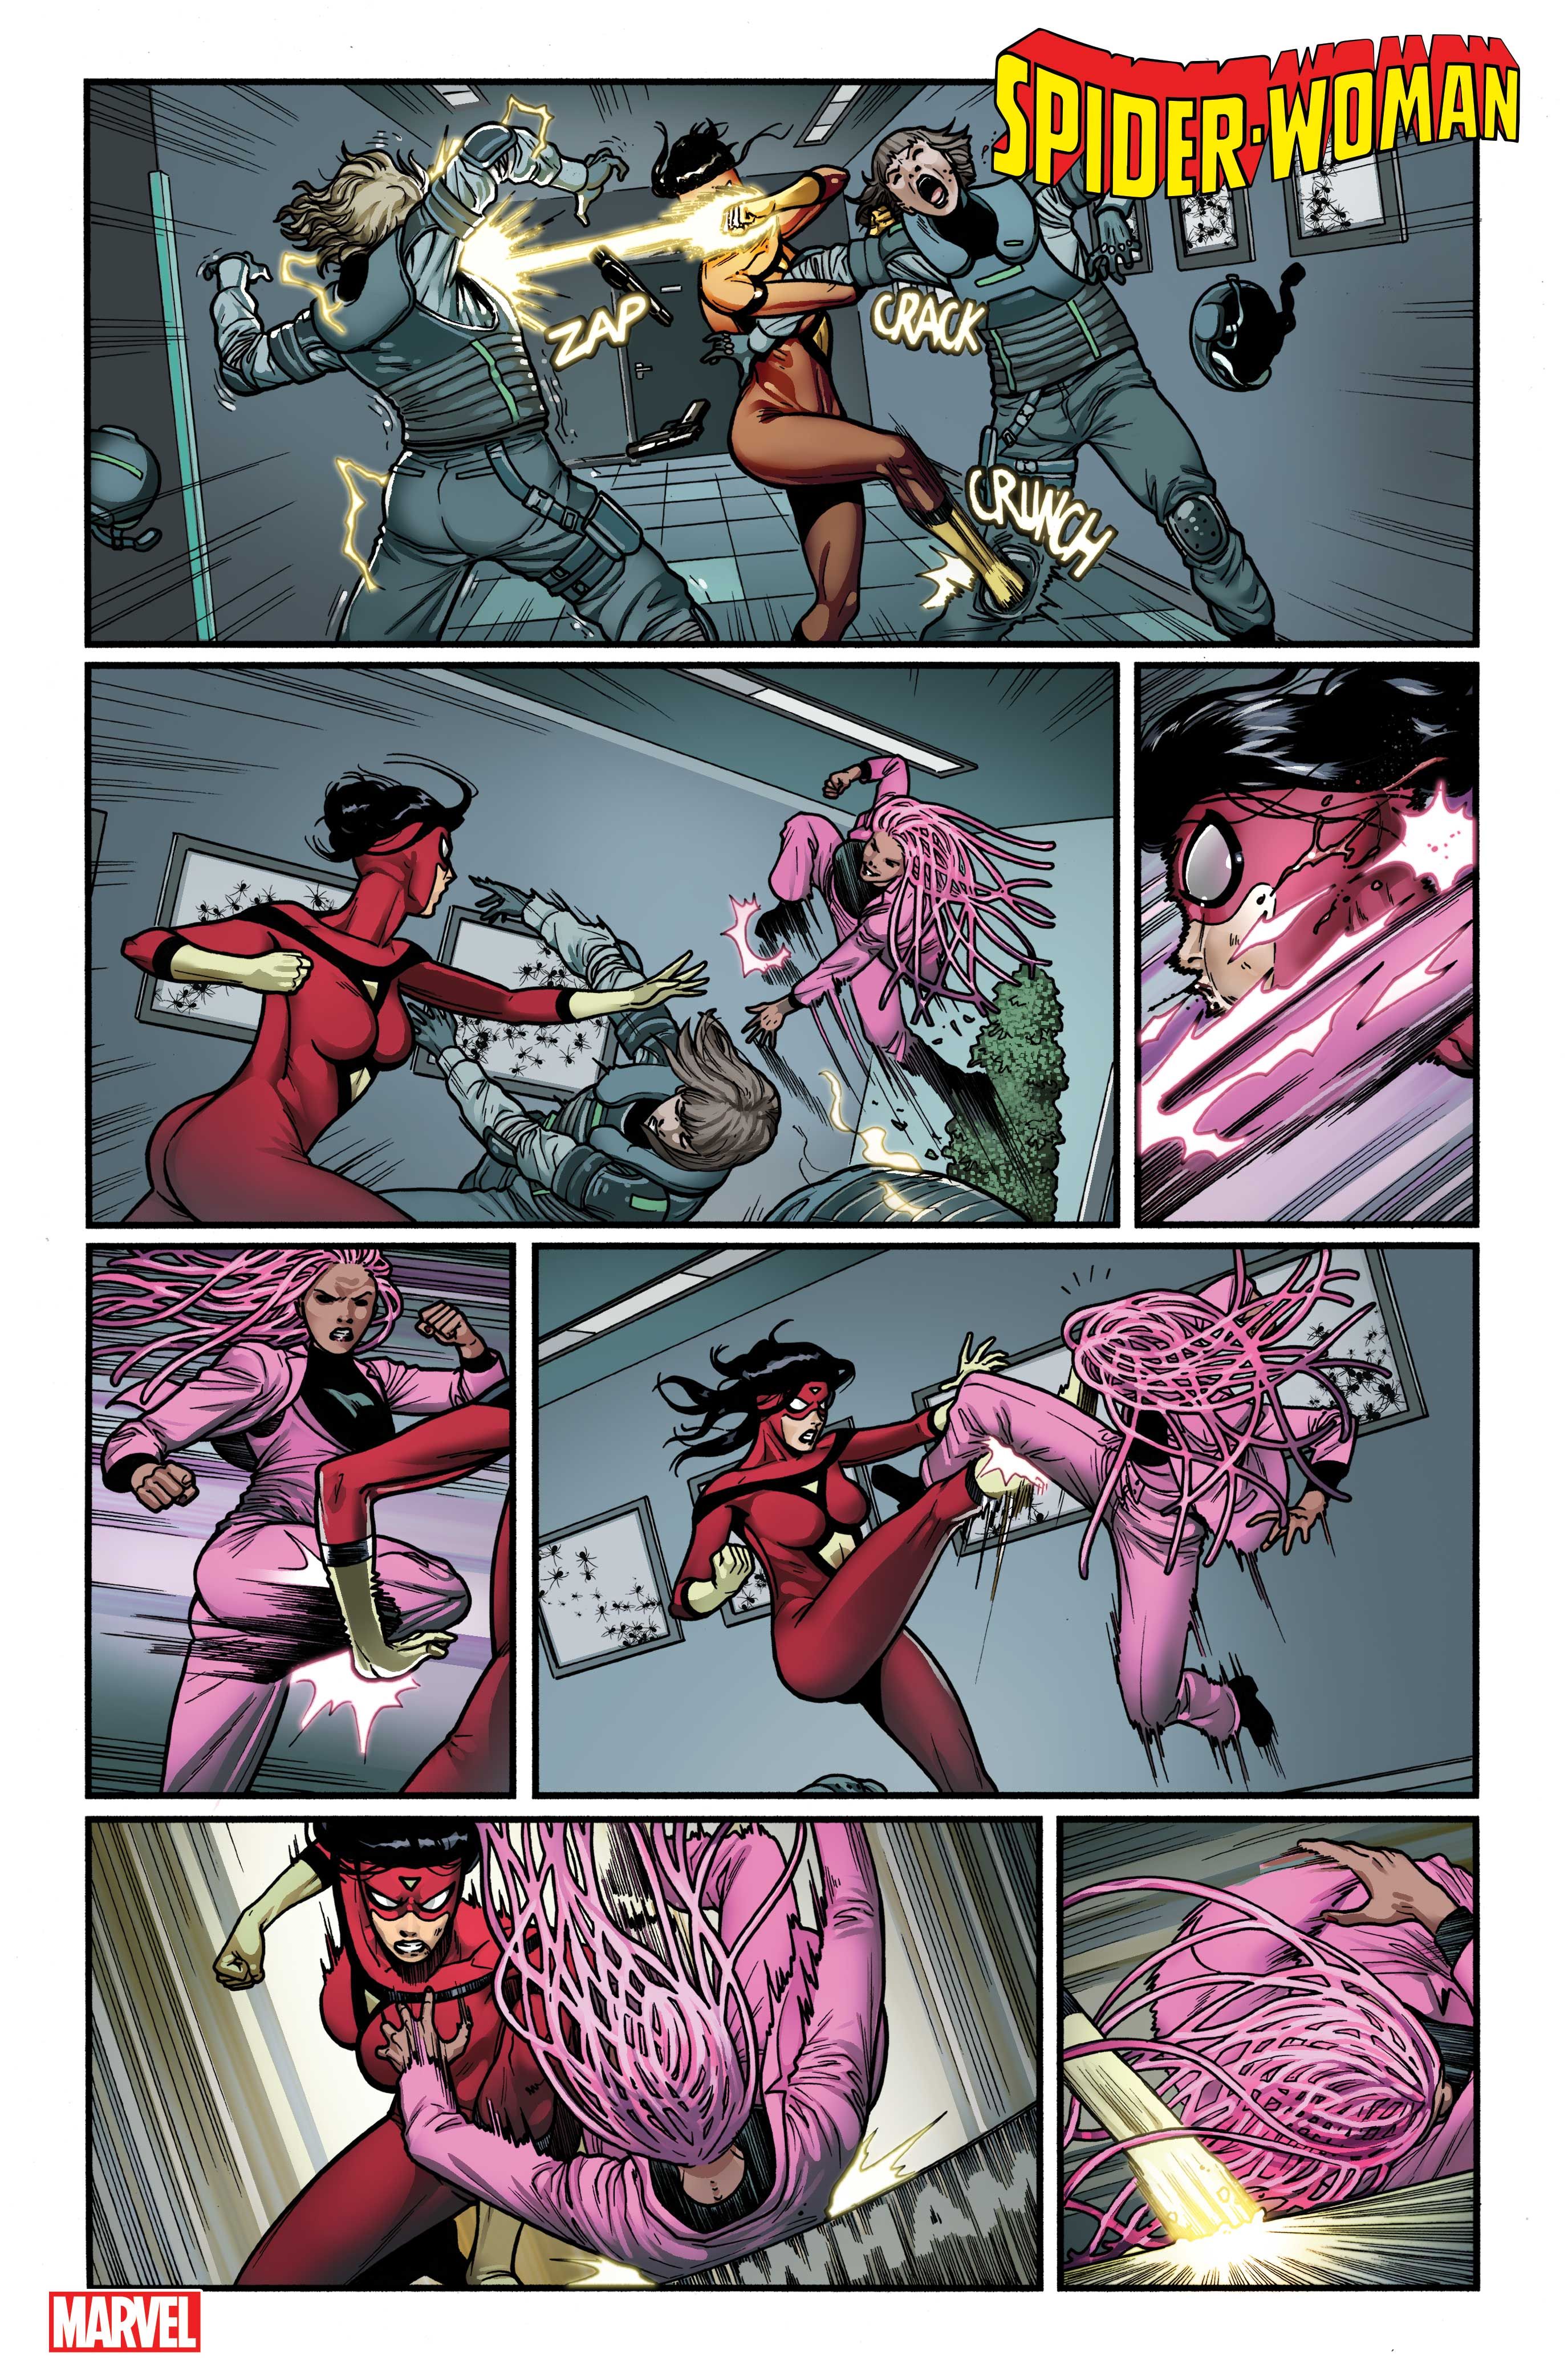 Marvel preview art for Spider-Woman #14